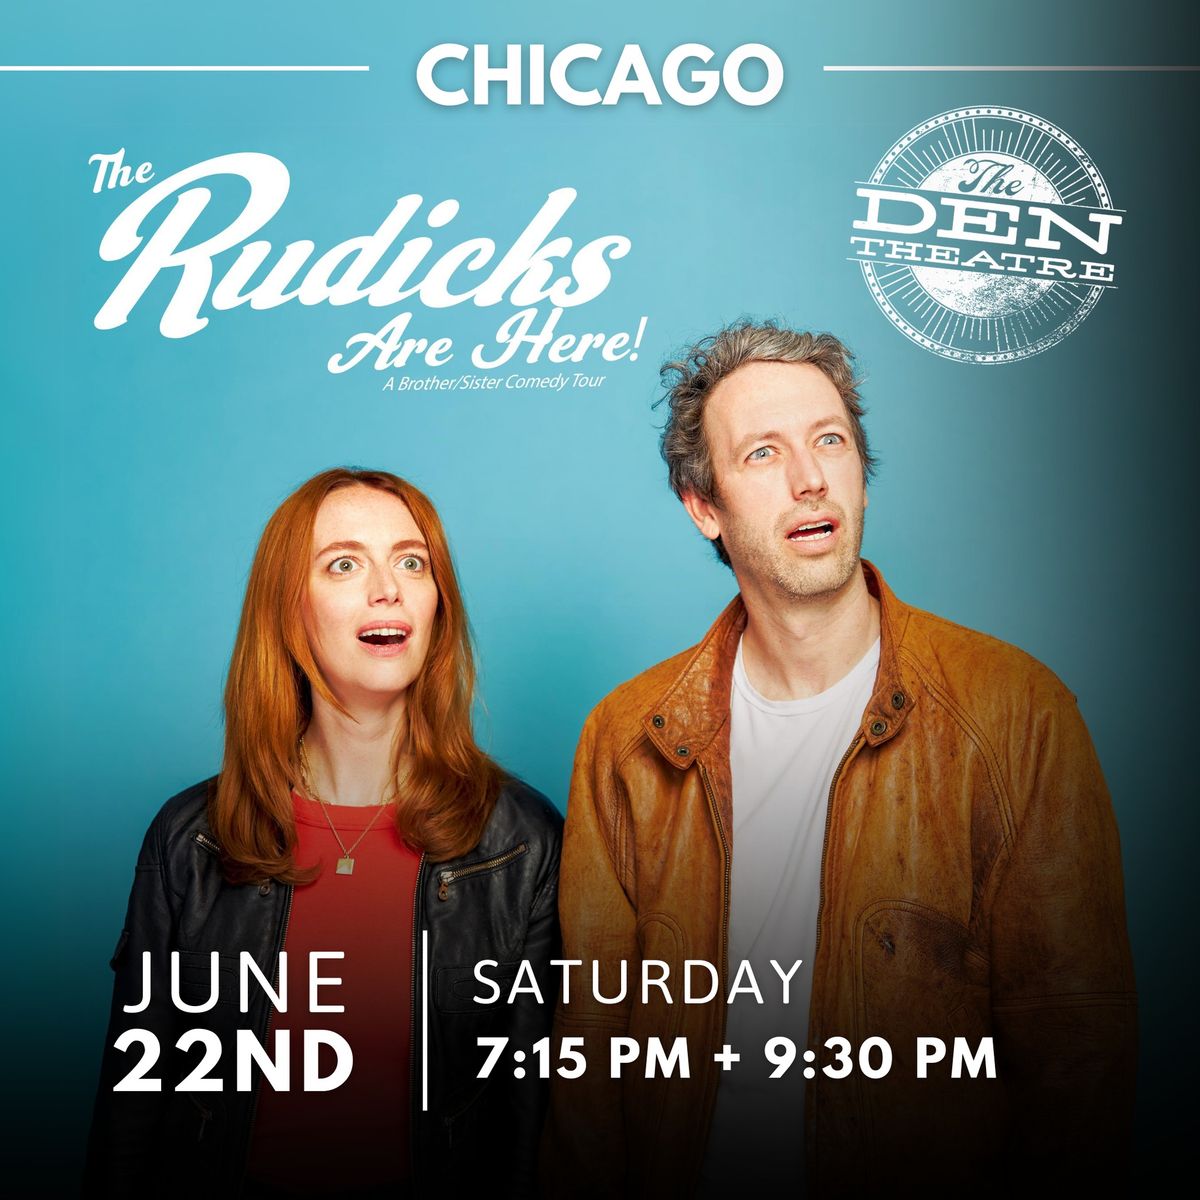 Andrew and Leah Rudick at The Den Theatre